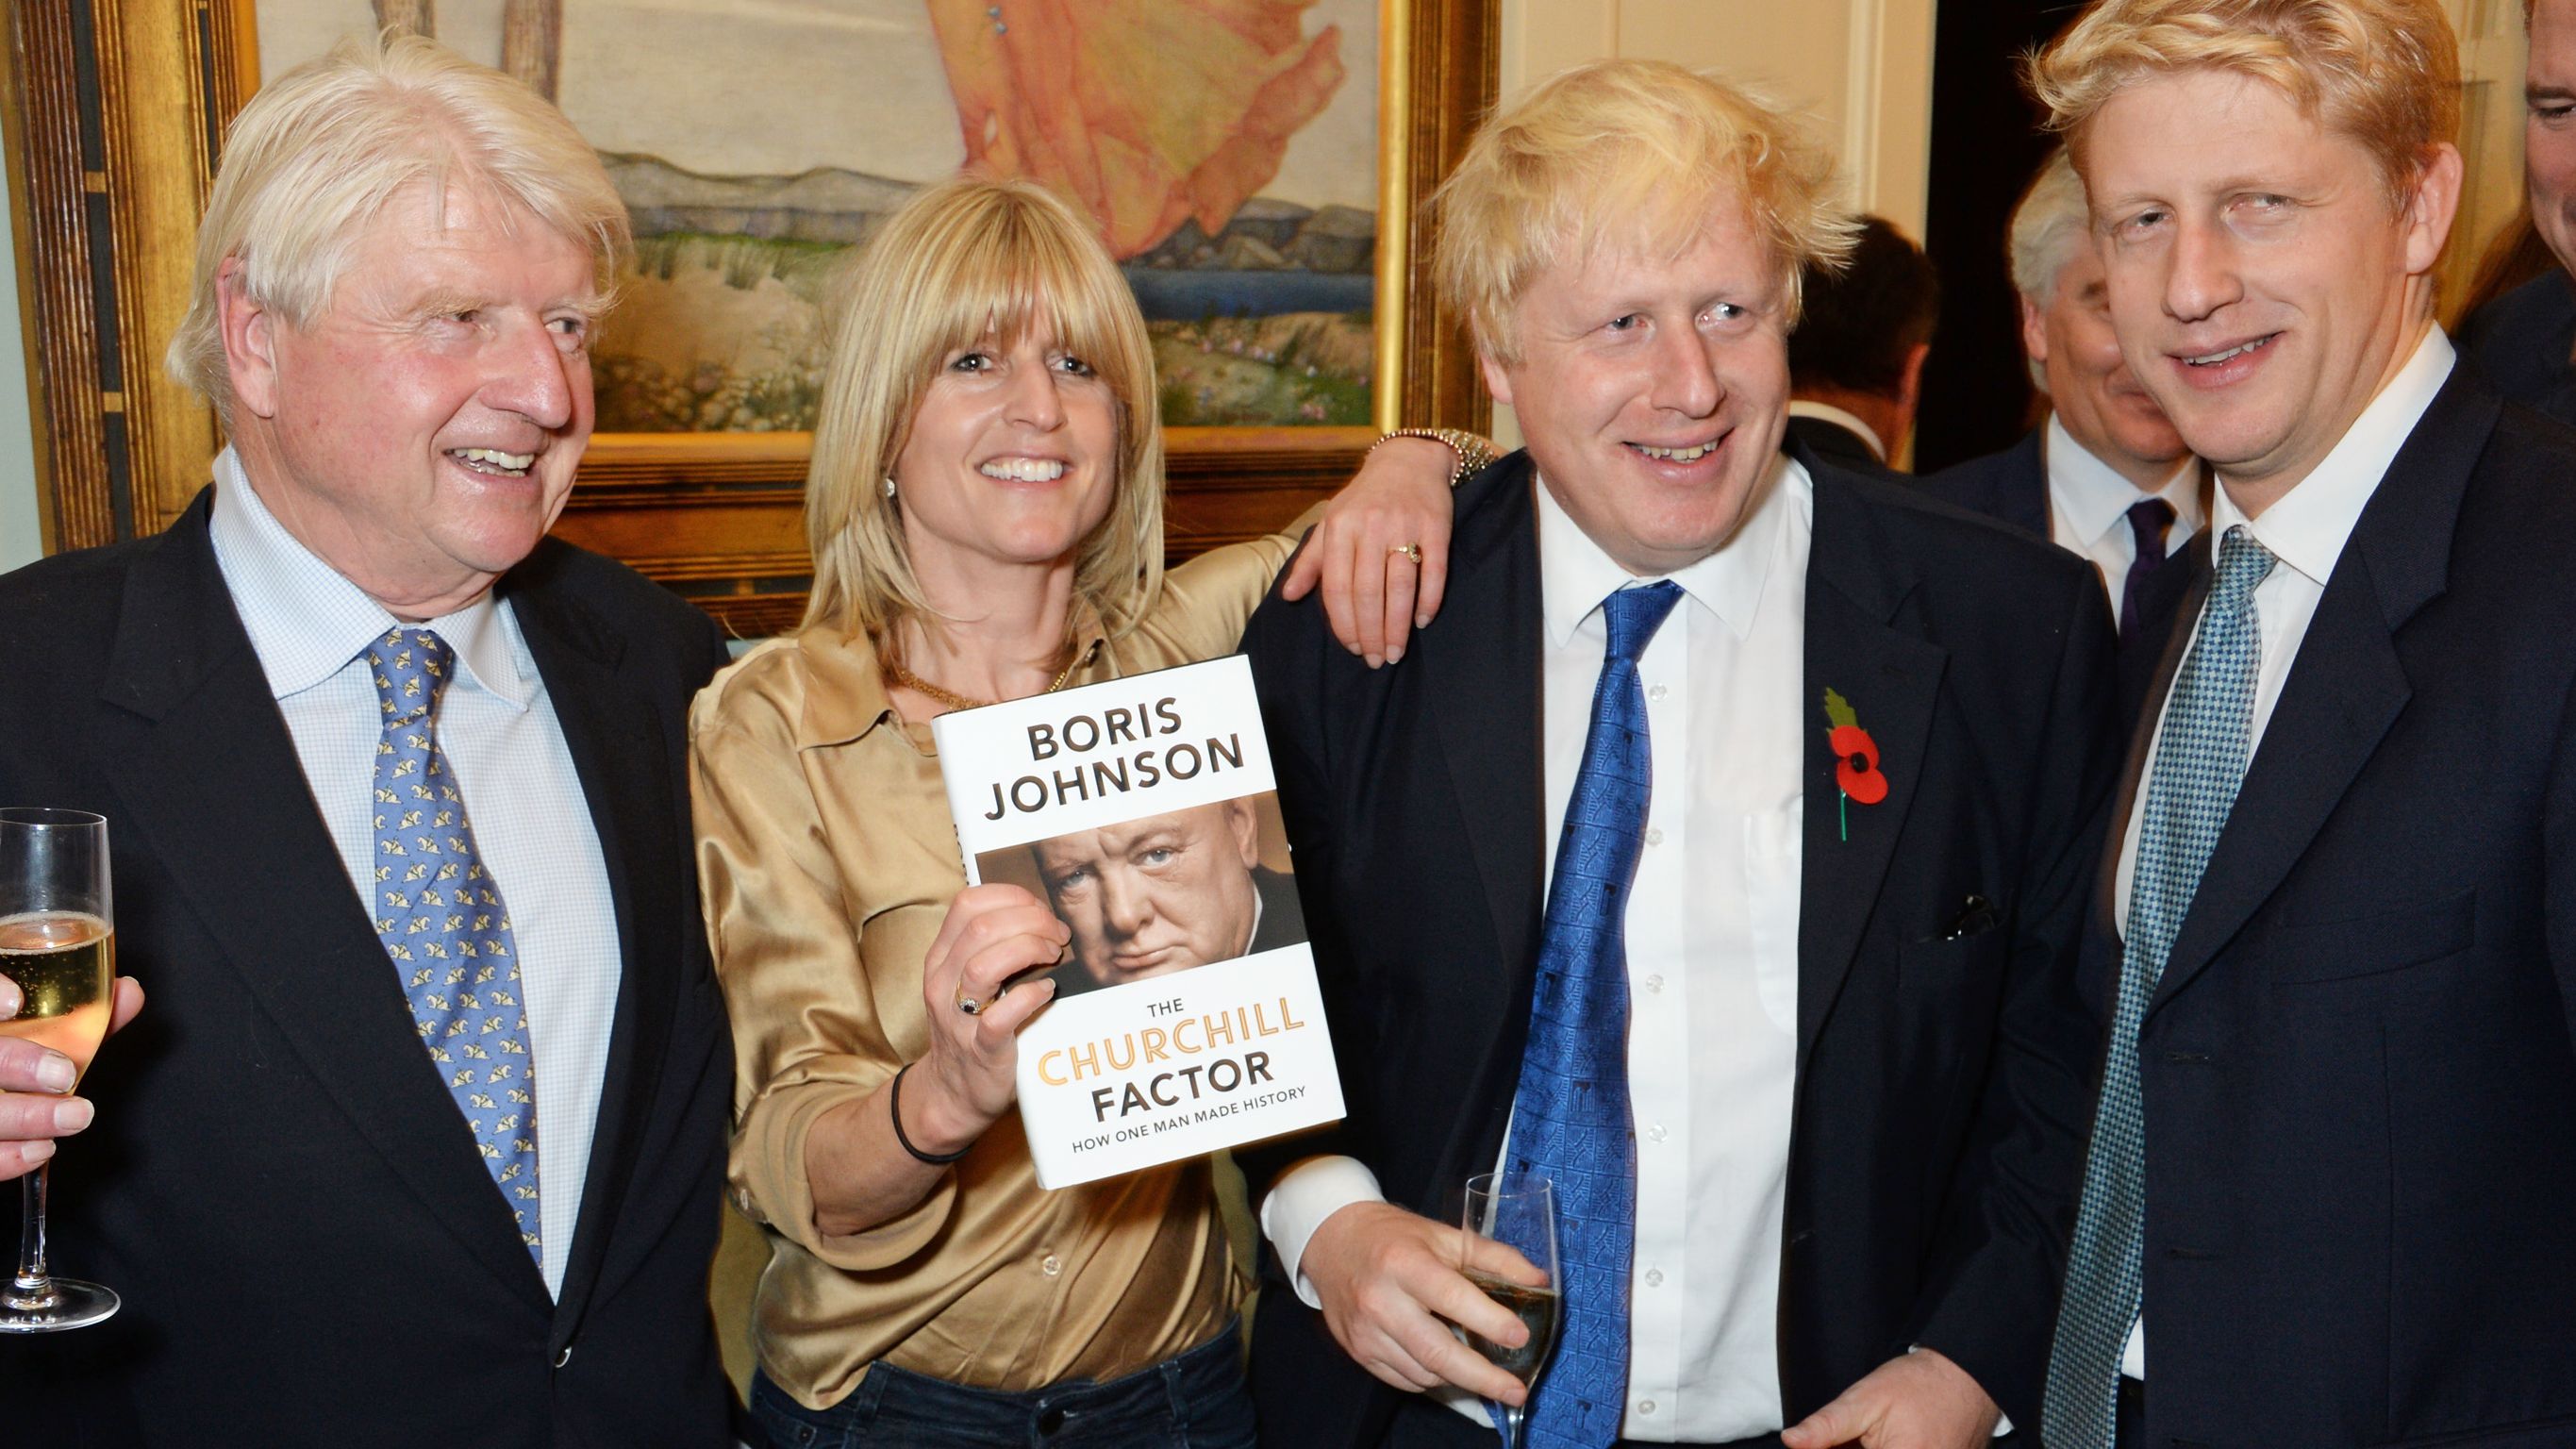 Johnson poses with his father, Stanley, and his siblings, Rachel and Jo, at the launch of his new book in October 2014. Stanley Johnson was once a member of the European Parliament.